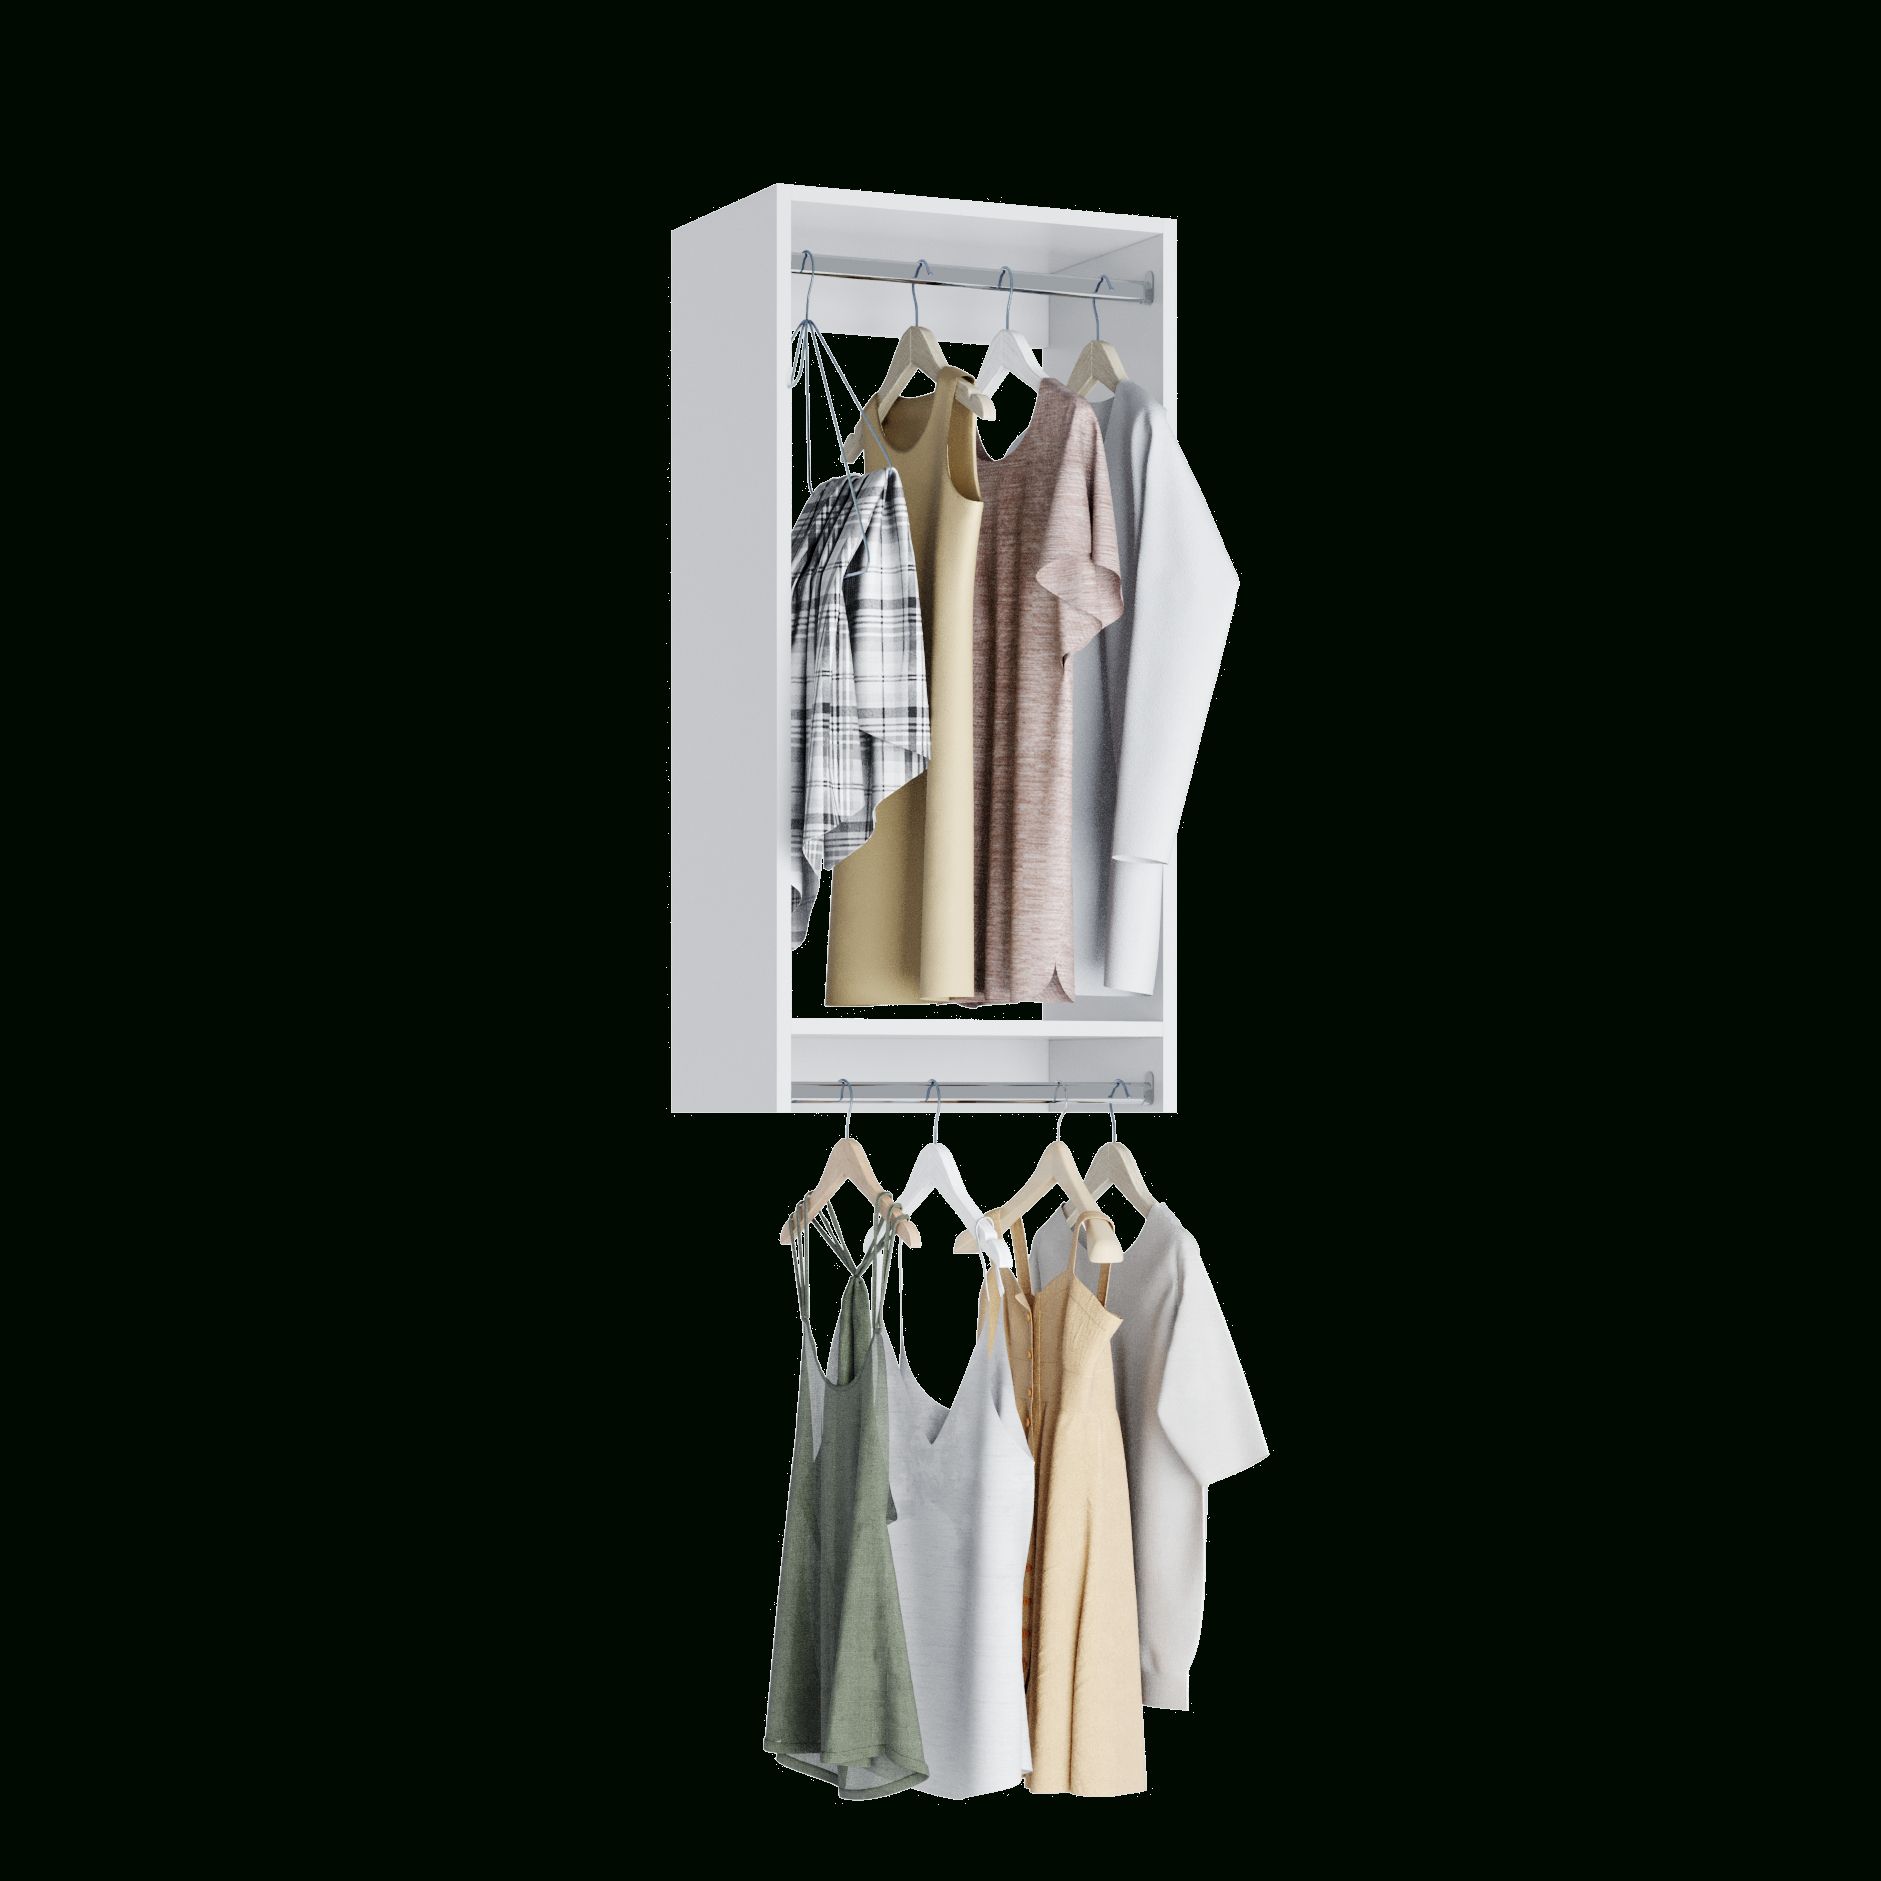 Double Hanging Closet Organizer: Great Price, Better Design Throughout Double Hanging Rail For Wardrobes (View 8 of 20)